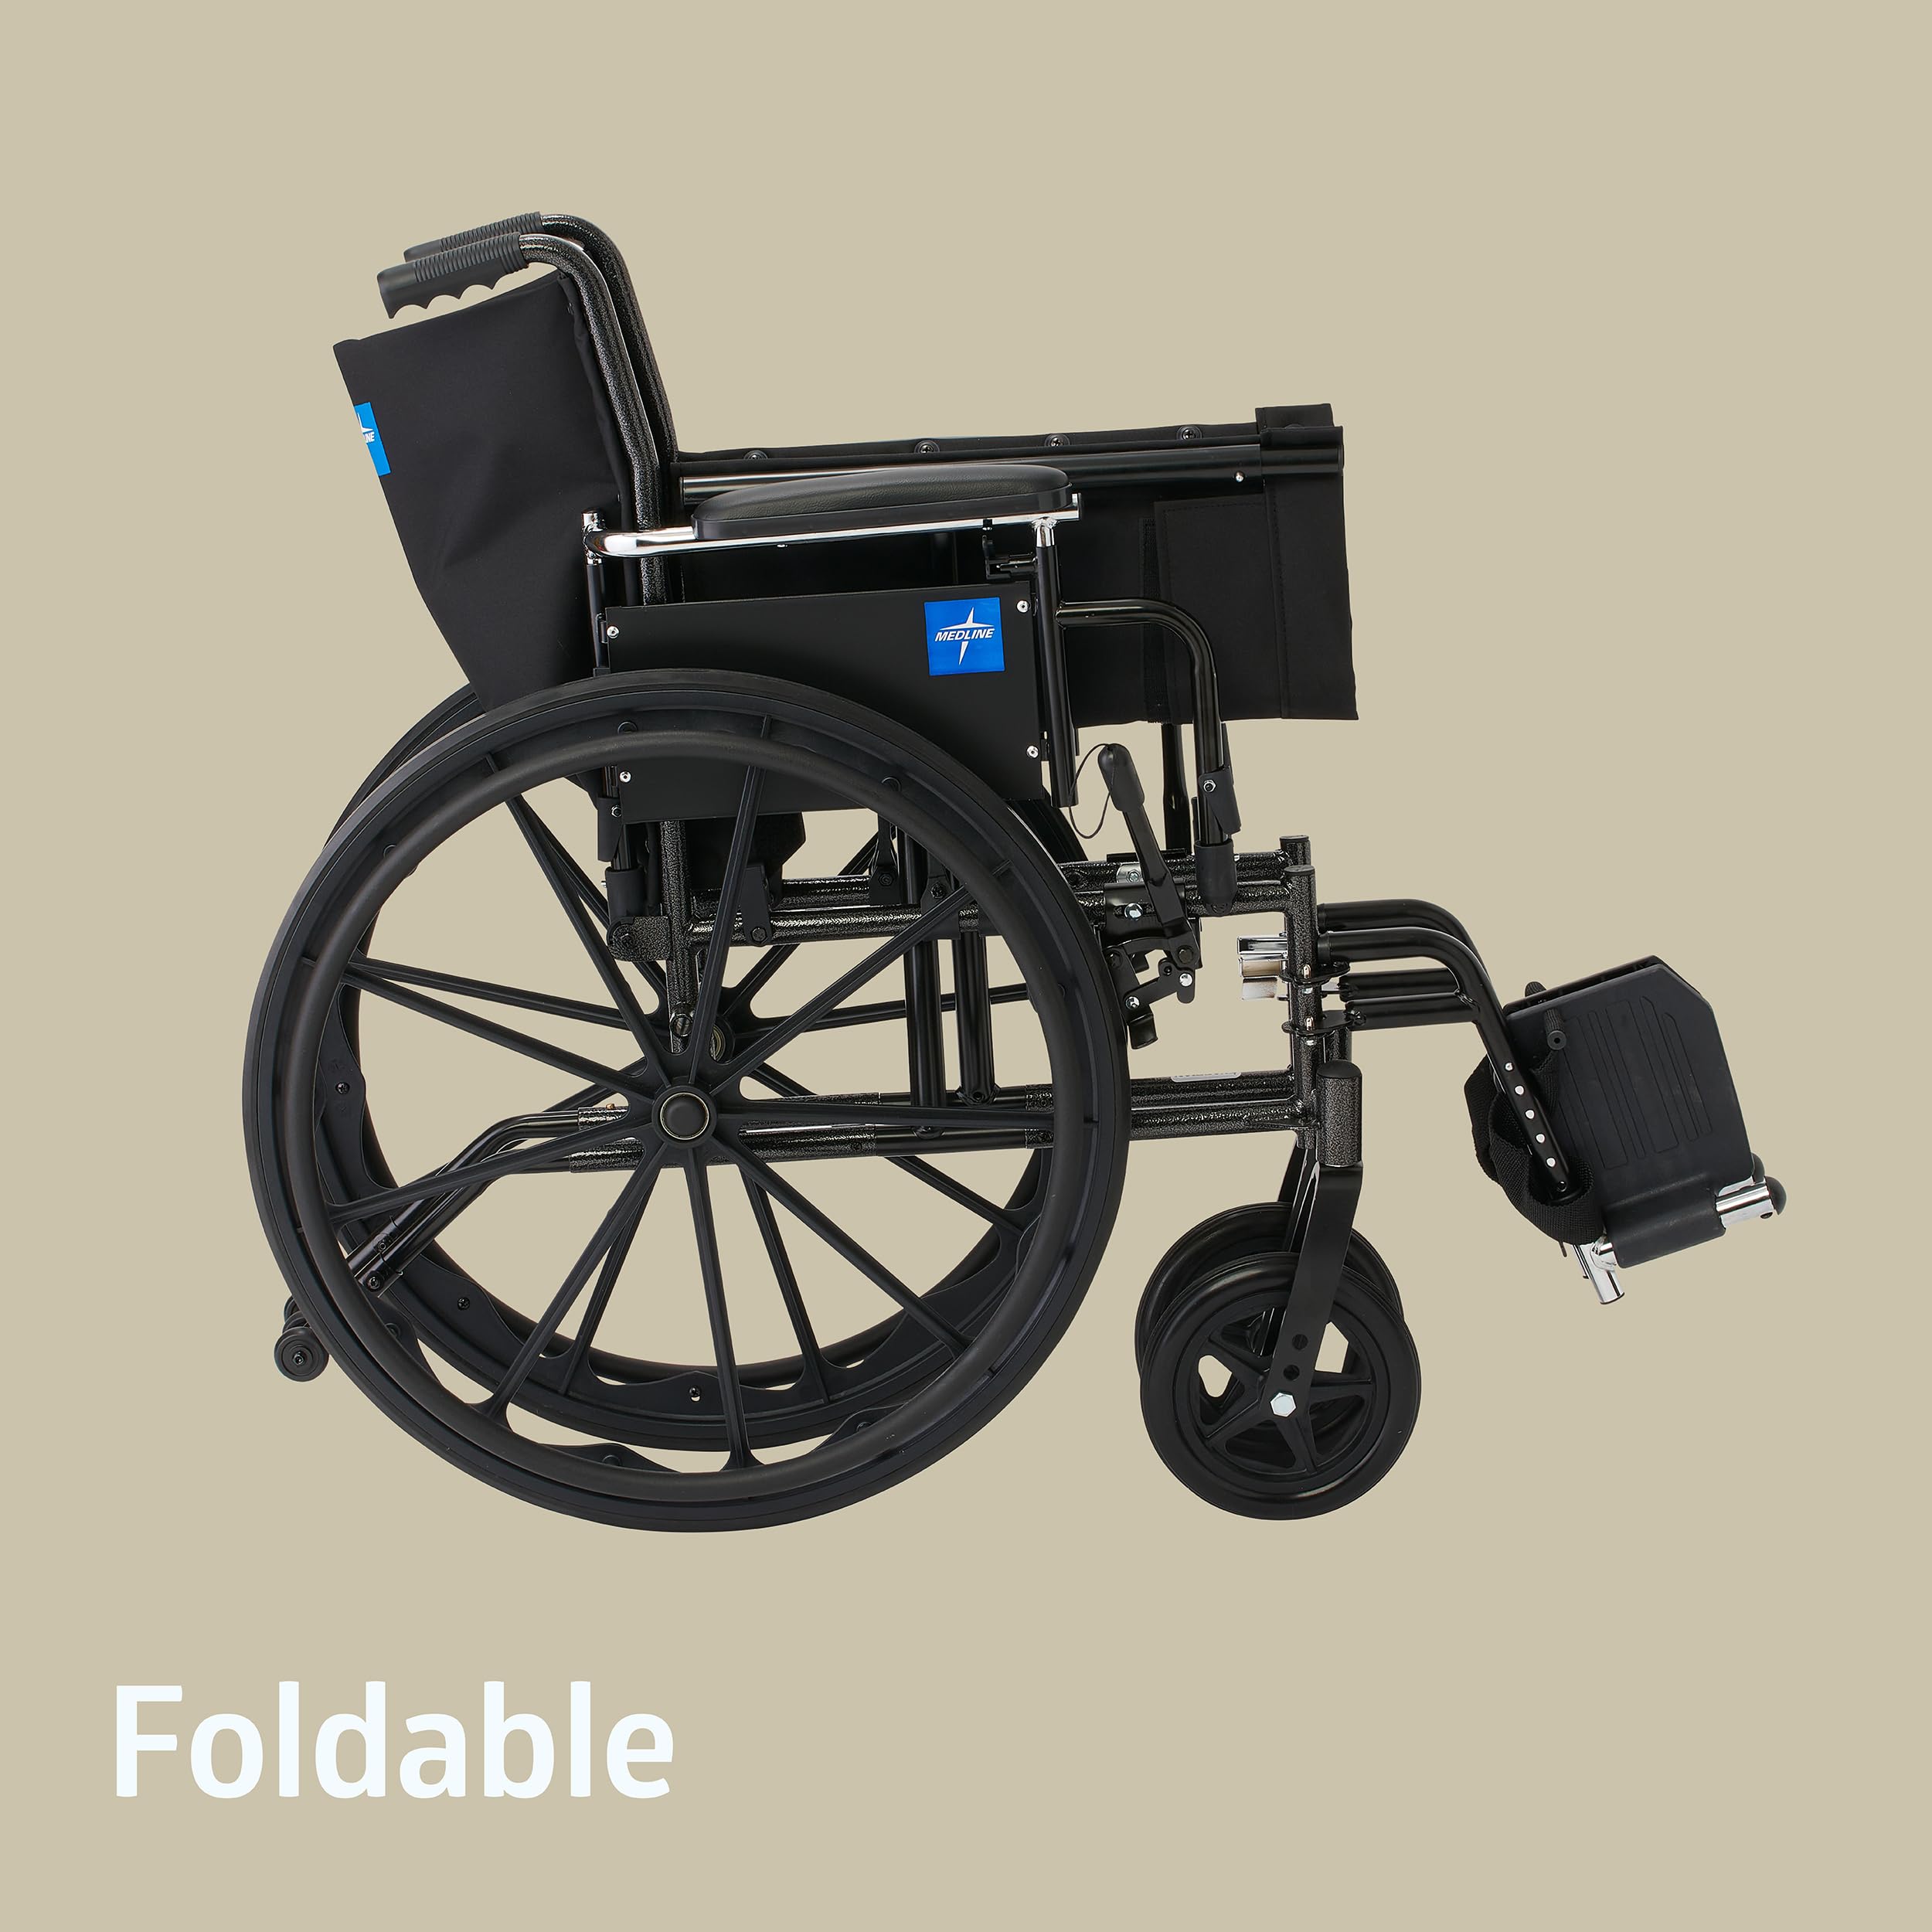 Medline 20” K3 Height Adjustable Wheelchair with Swing-Back Desk-Length Arms & Swing-Away Footrests, 300 lbs. Capacity Transport Aid, Adults & Seniors,Black